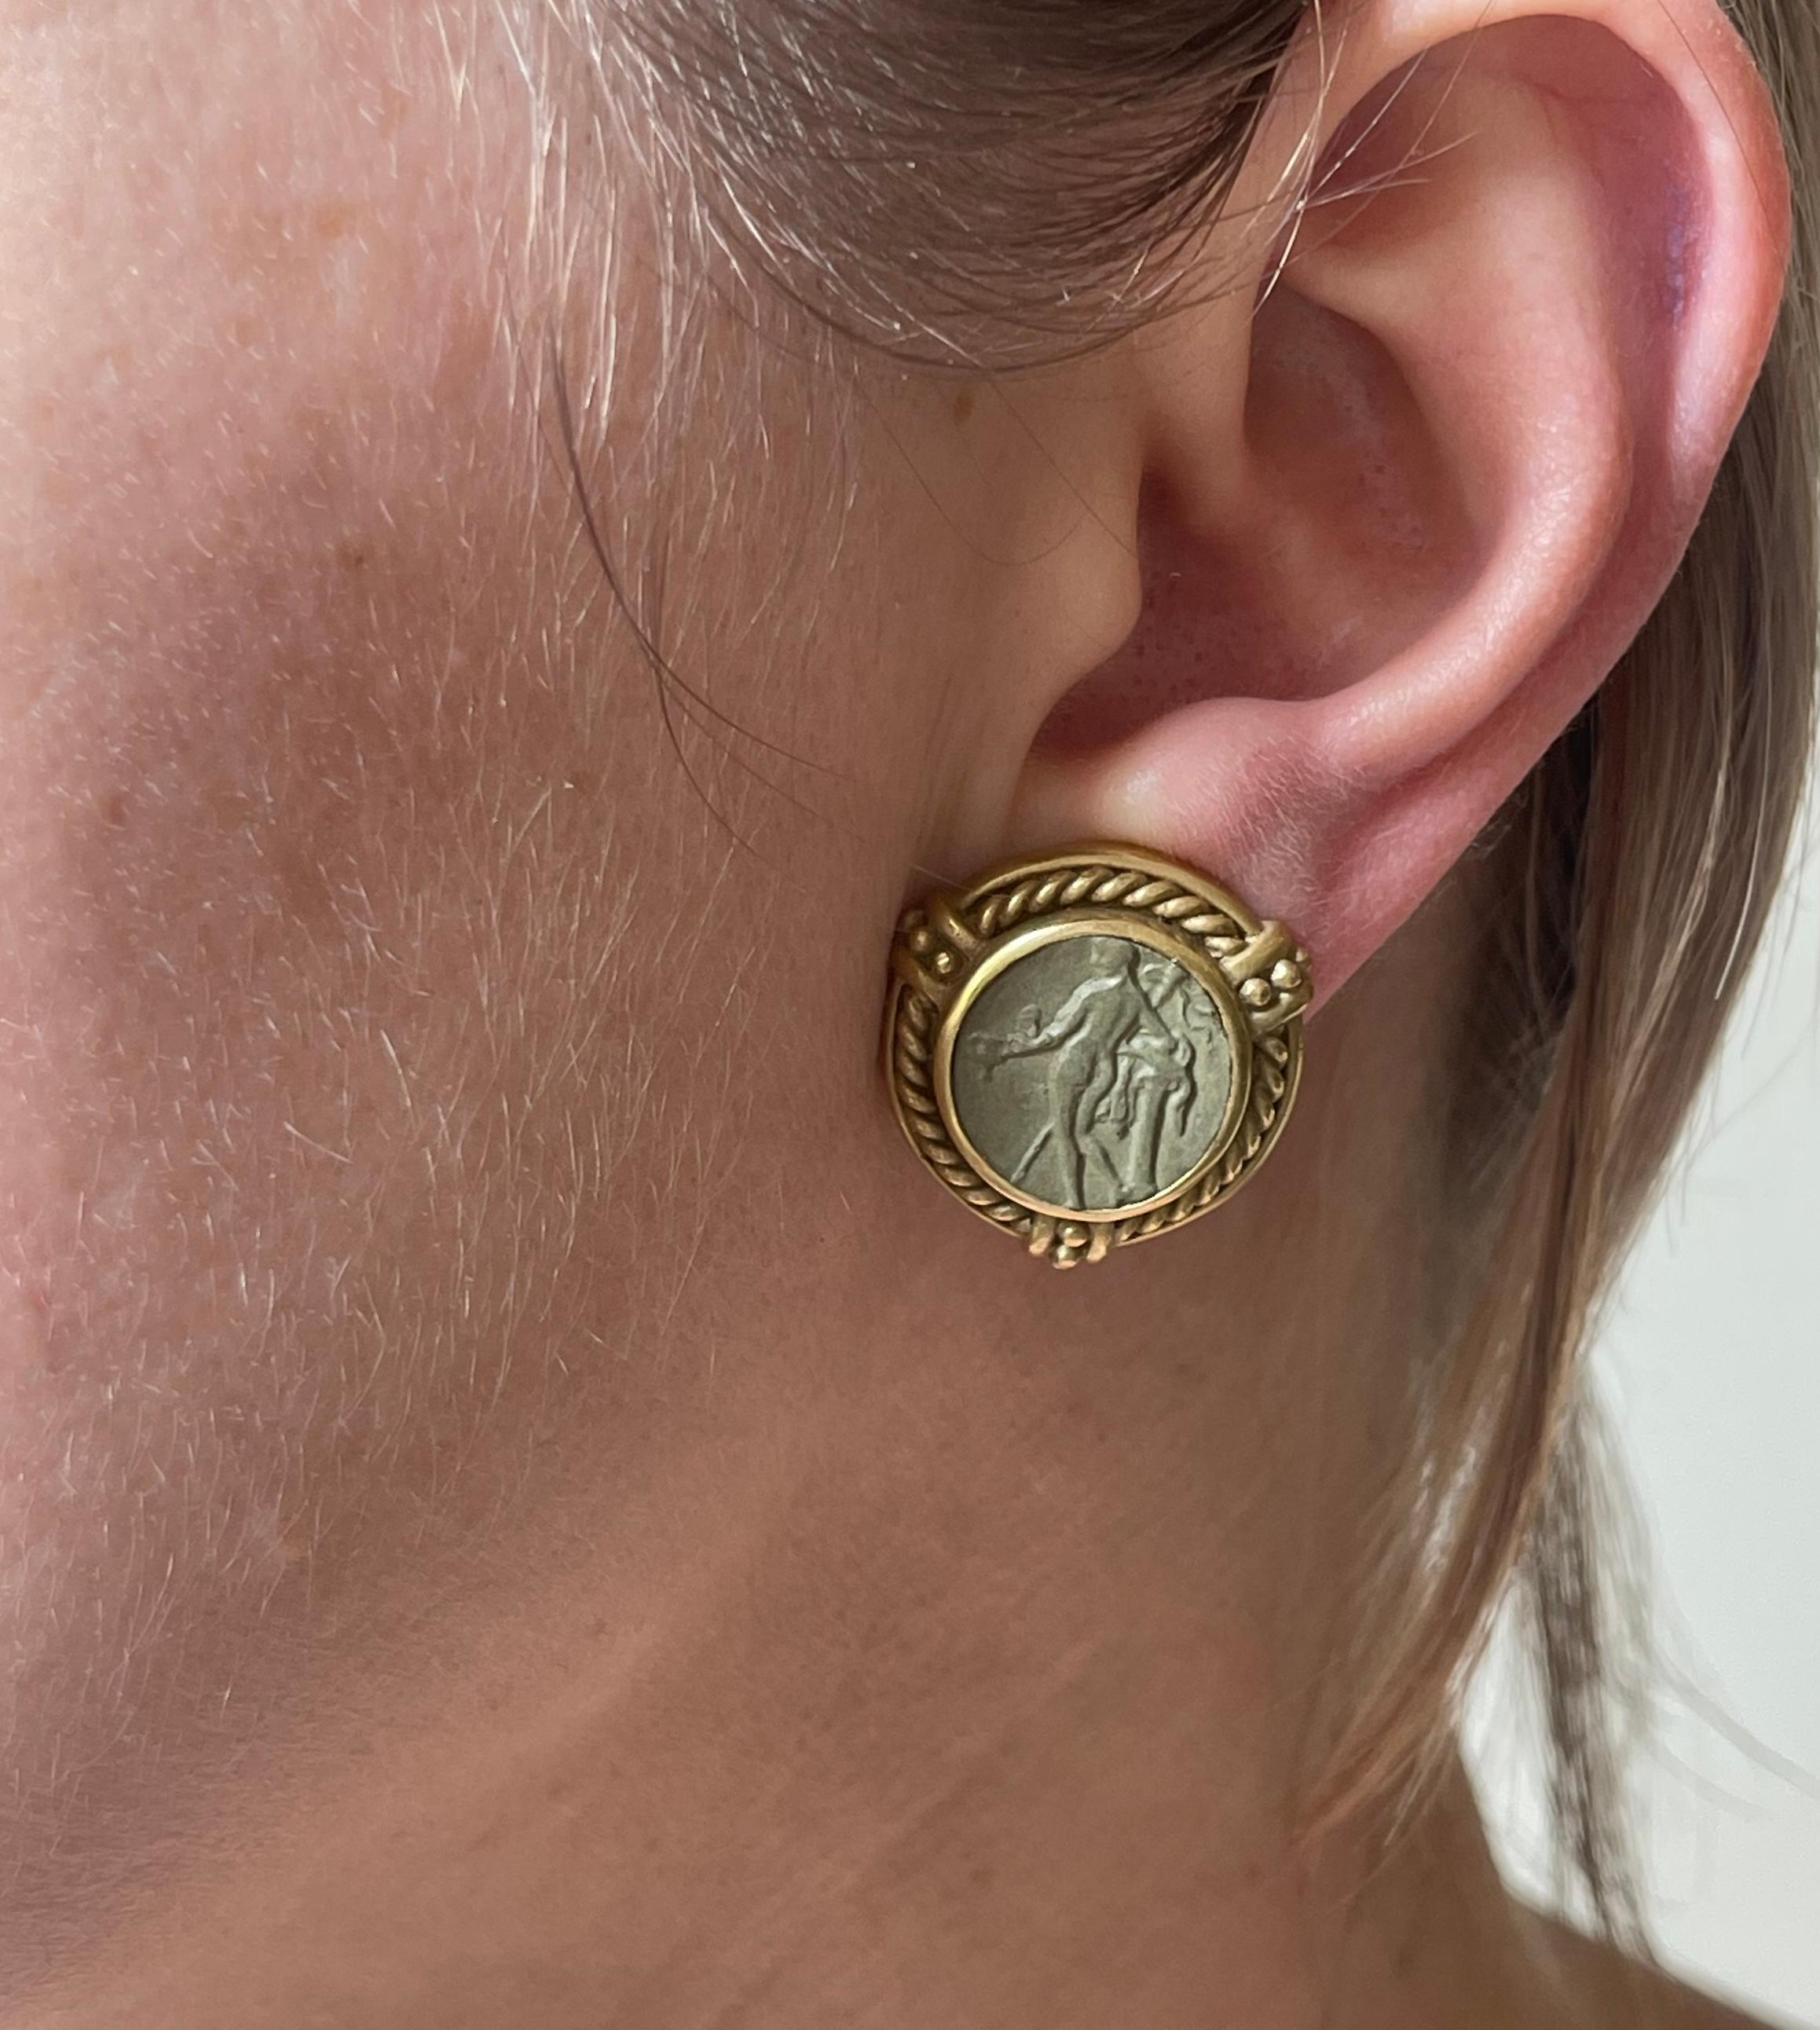 Pair of 18k yellow gold earrings by Judith Ripka, set with lava cameos, depicting a  nymph silhouette. Earrings have hooks to attach drops. Measure 7/8